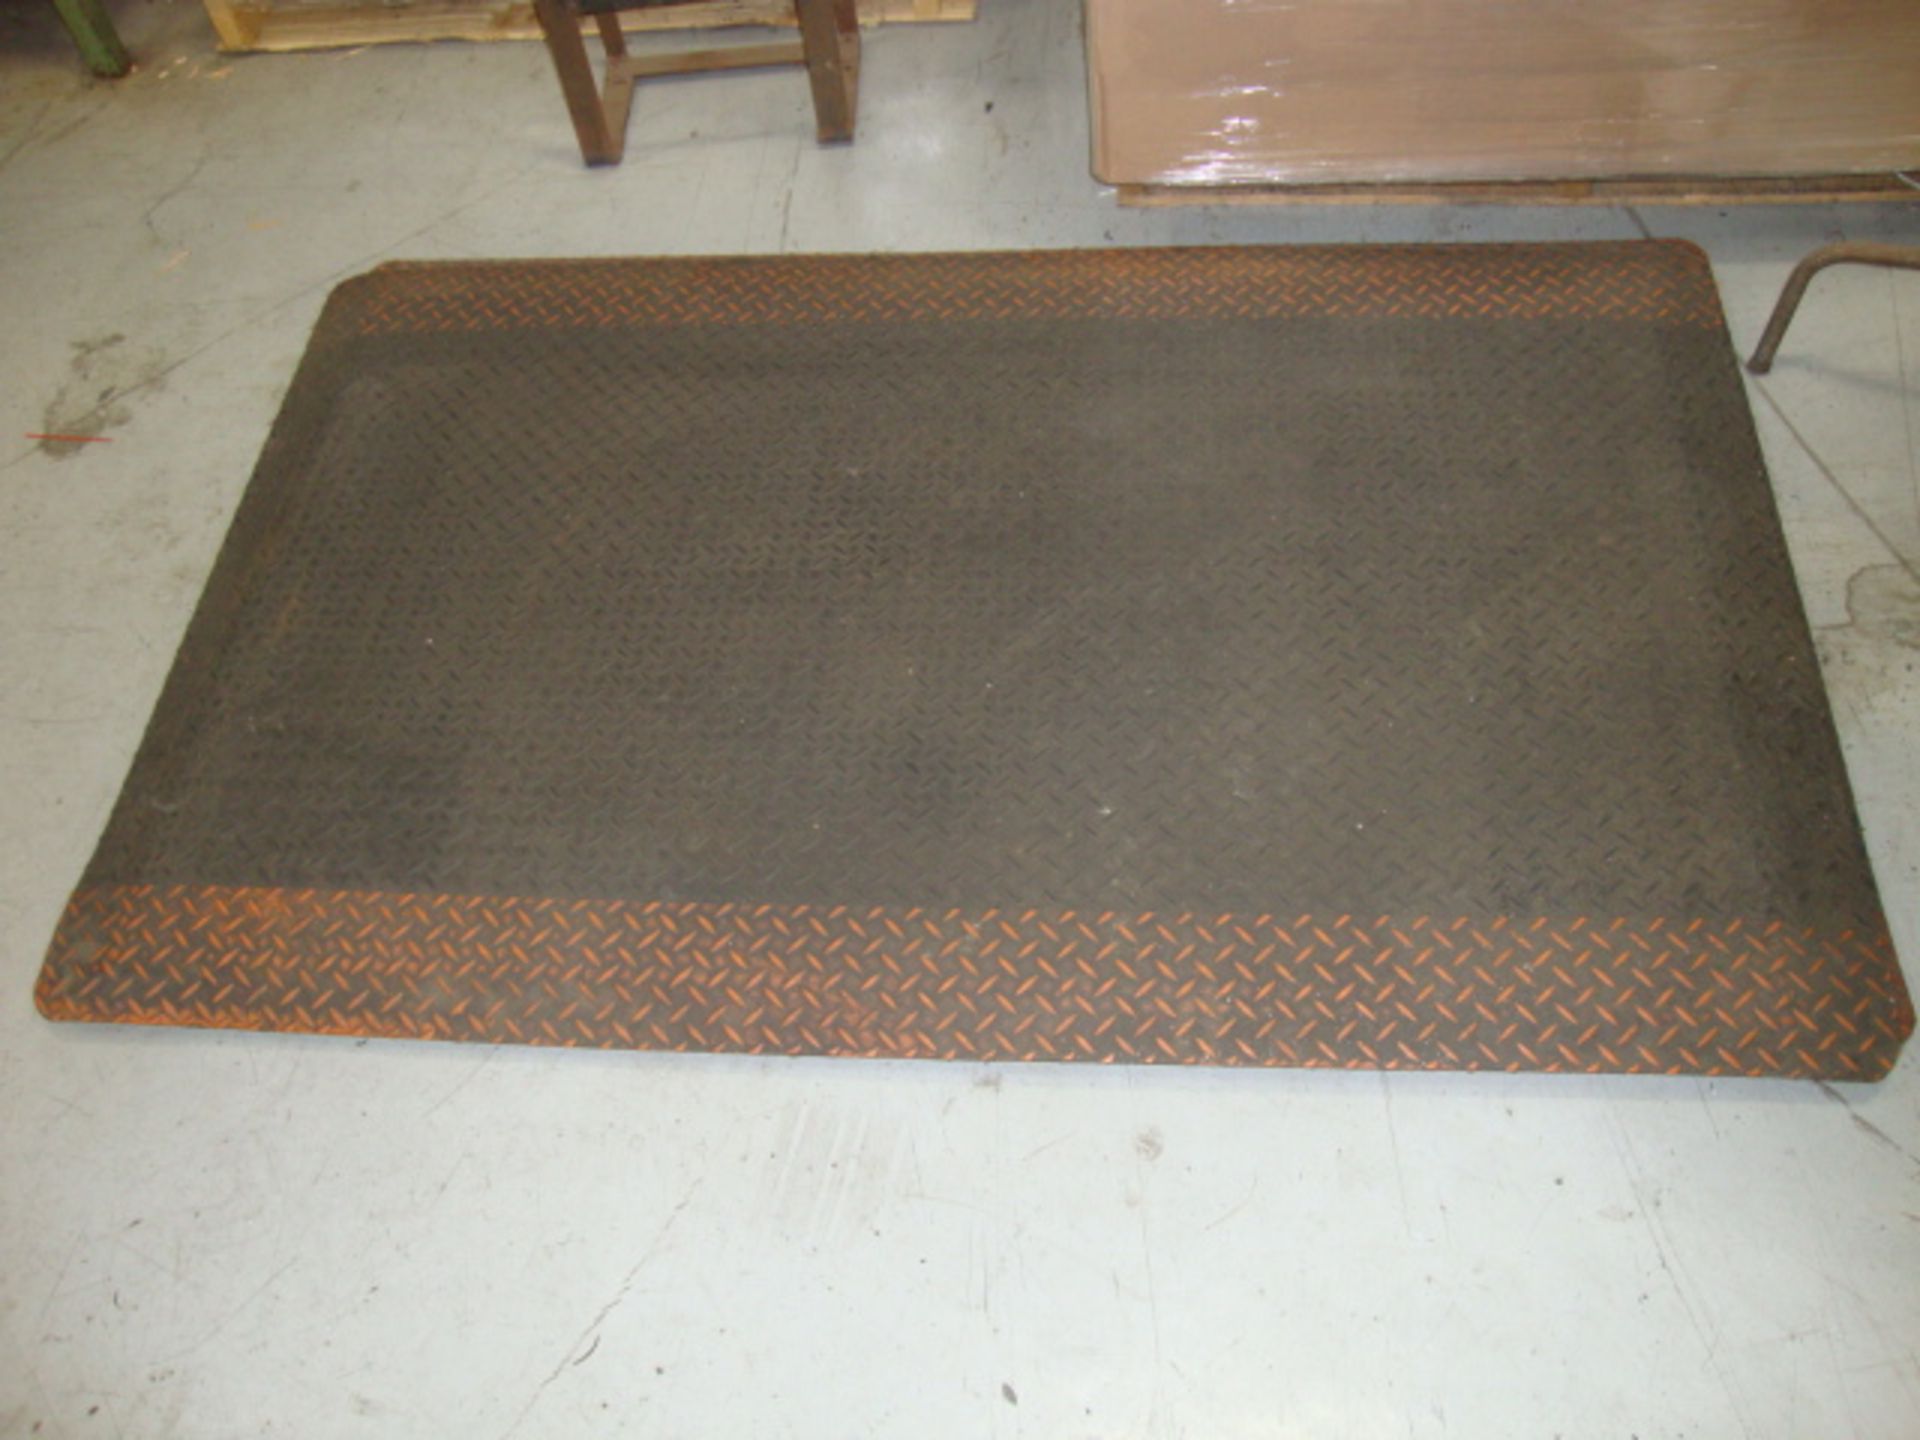 Anti-Fatigue and Oil Resistant Mat, approx. 60" x 36"